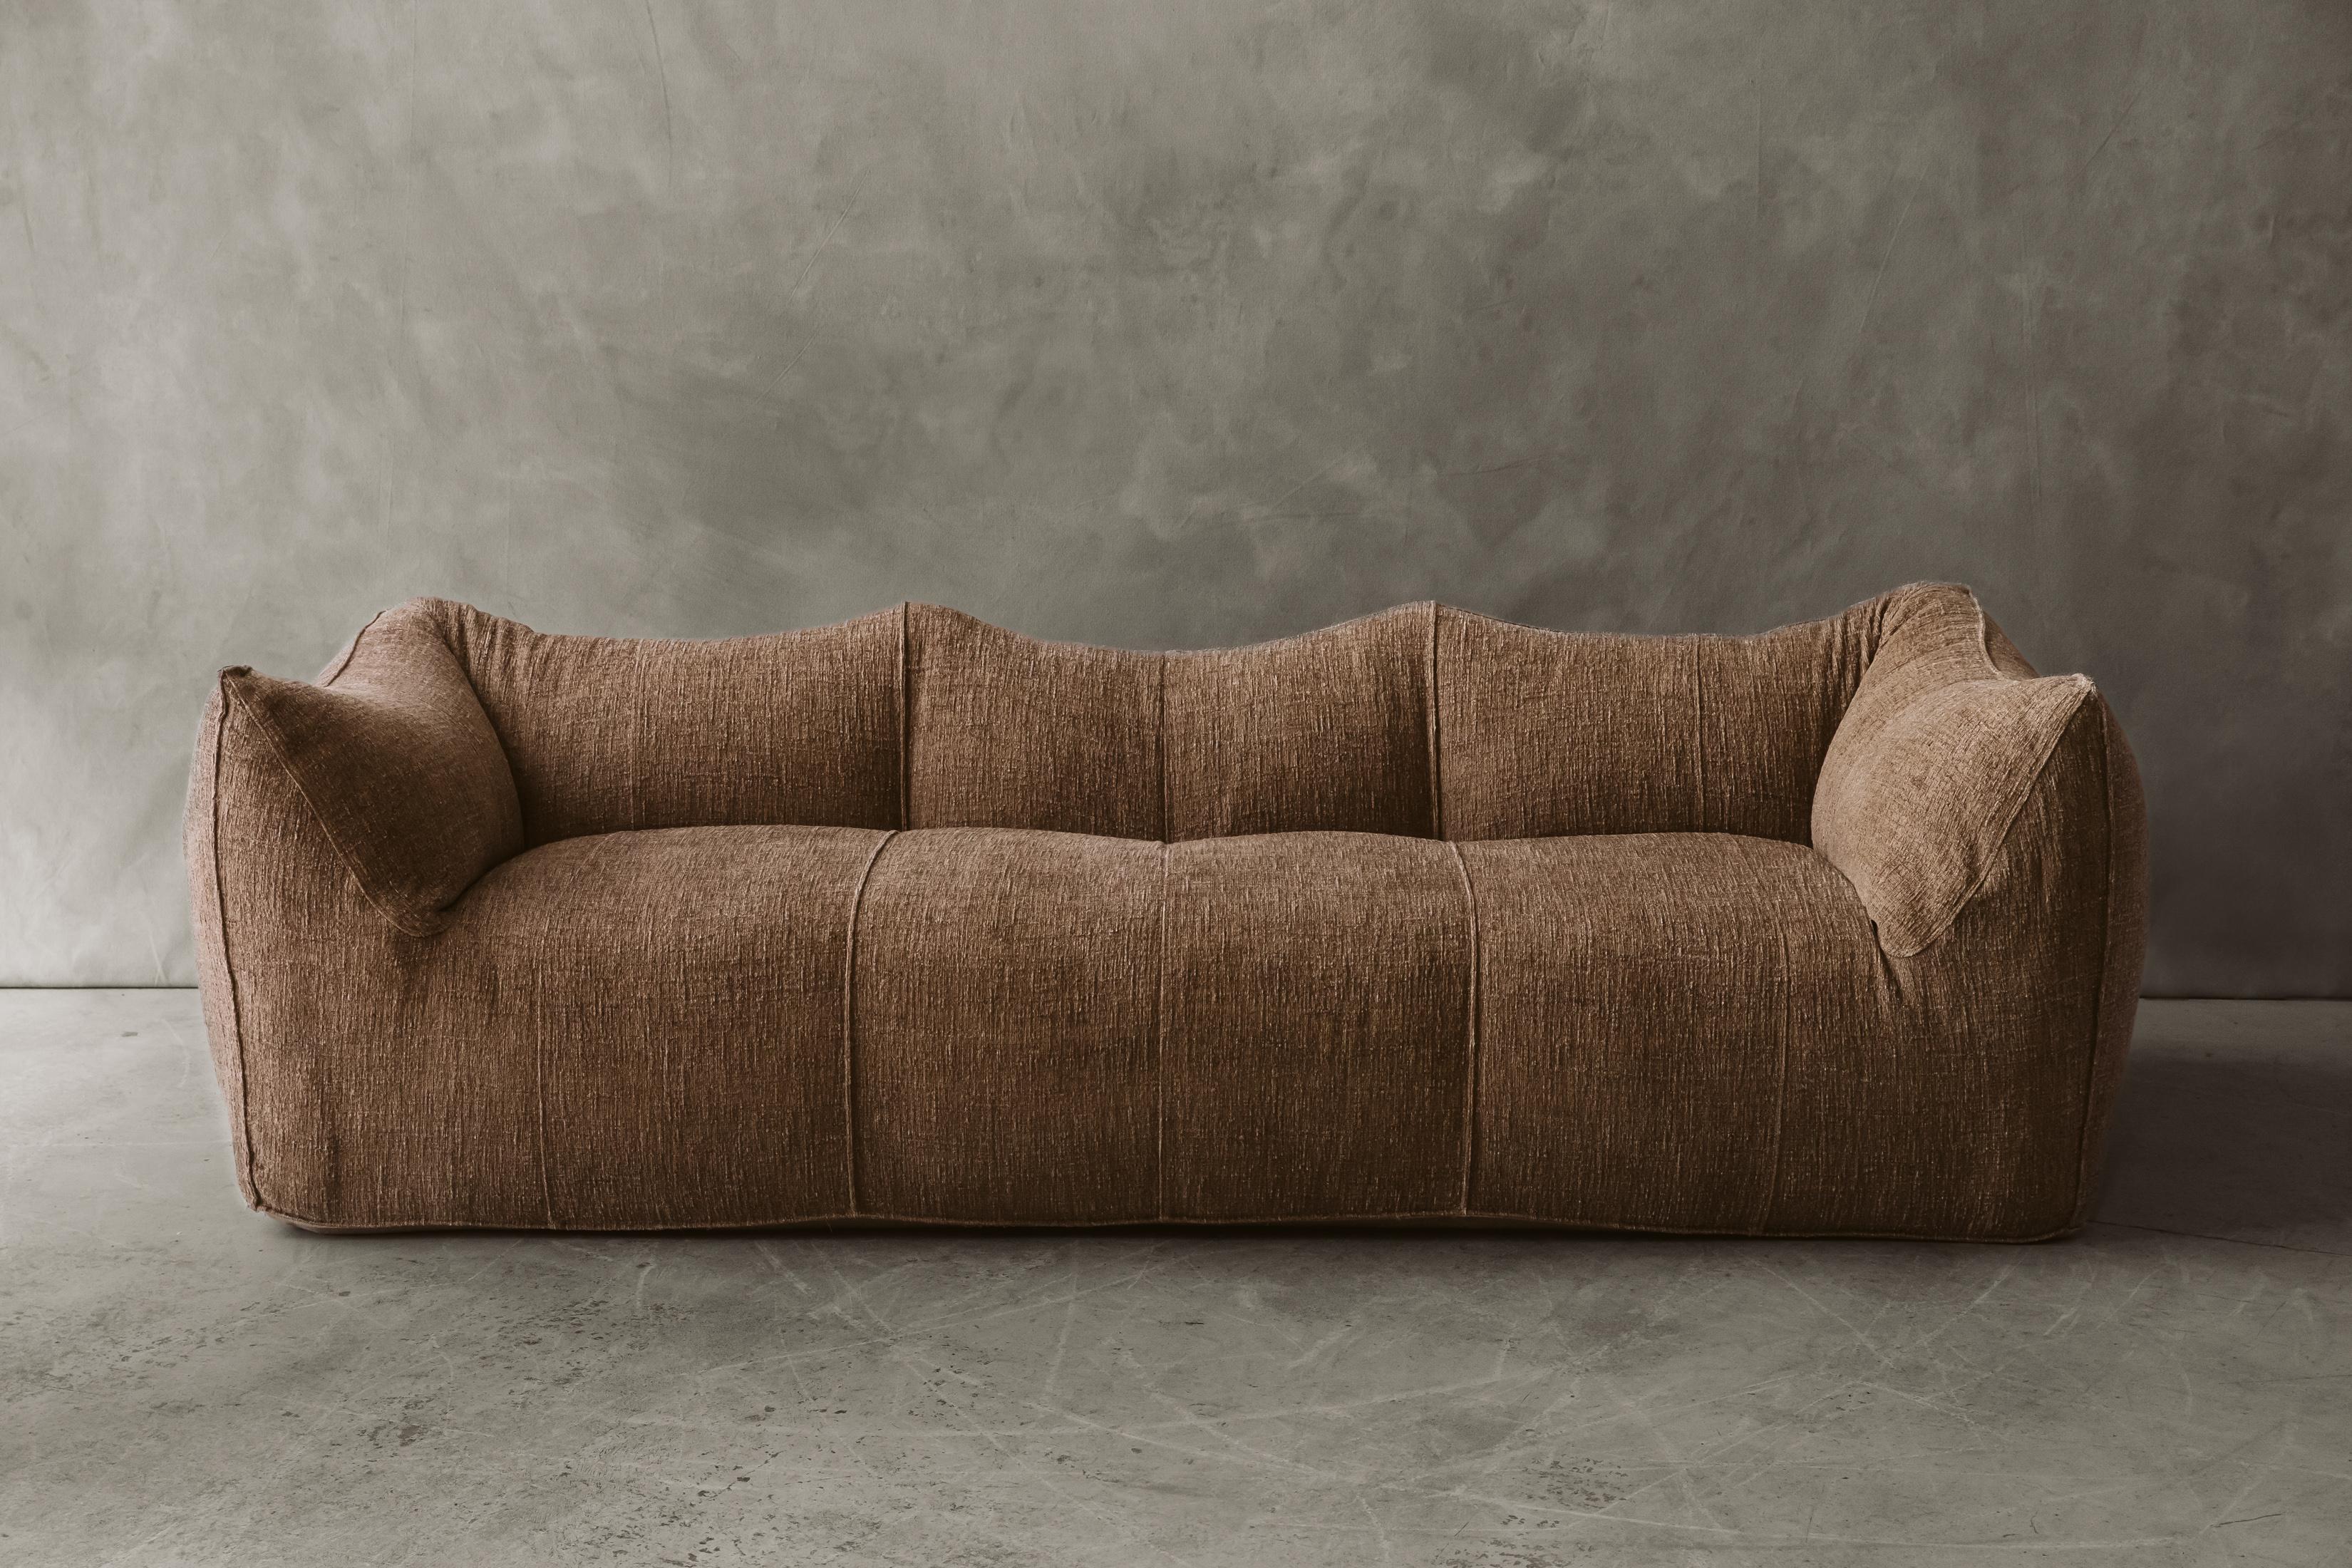 Le Bambole 3-Seater Leather Sofa by Mario Bellini for B&B Italia, 1970s.  Later upholstered in light brown upholstery and in excellent condition.  

We don't have the time to write an extensive description on each of our pieces. We prefer to speak